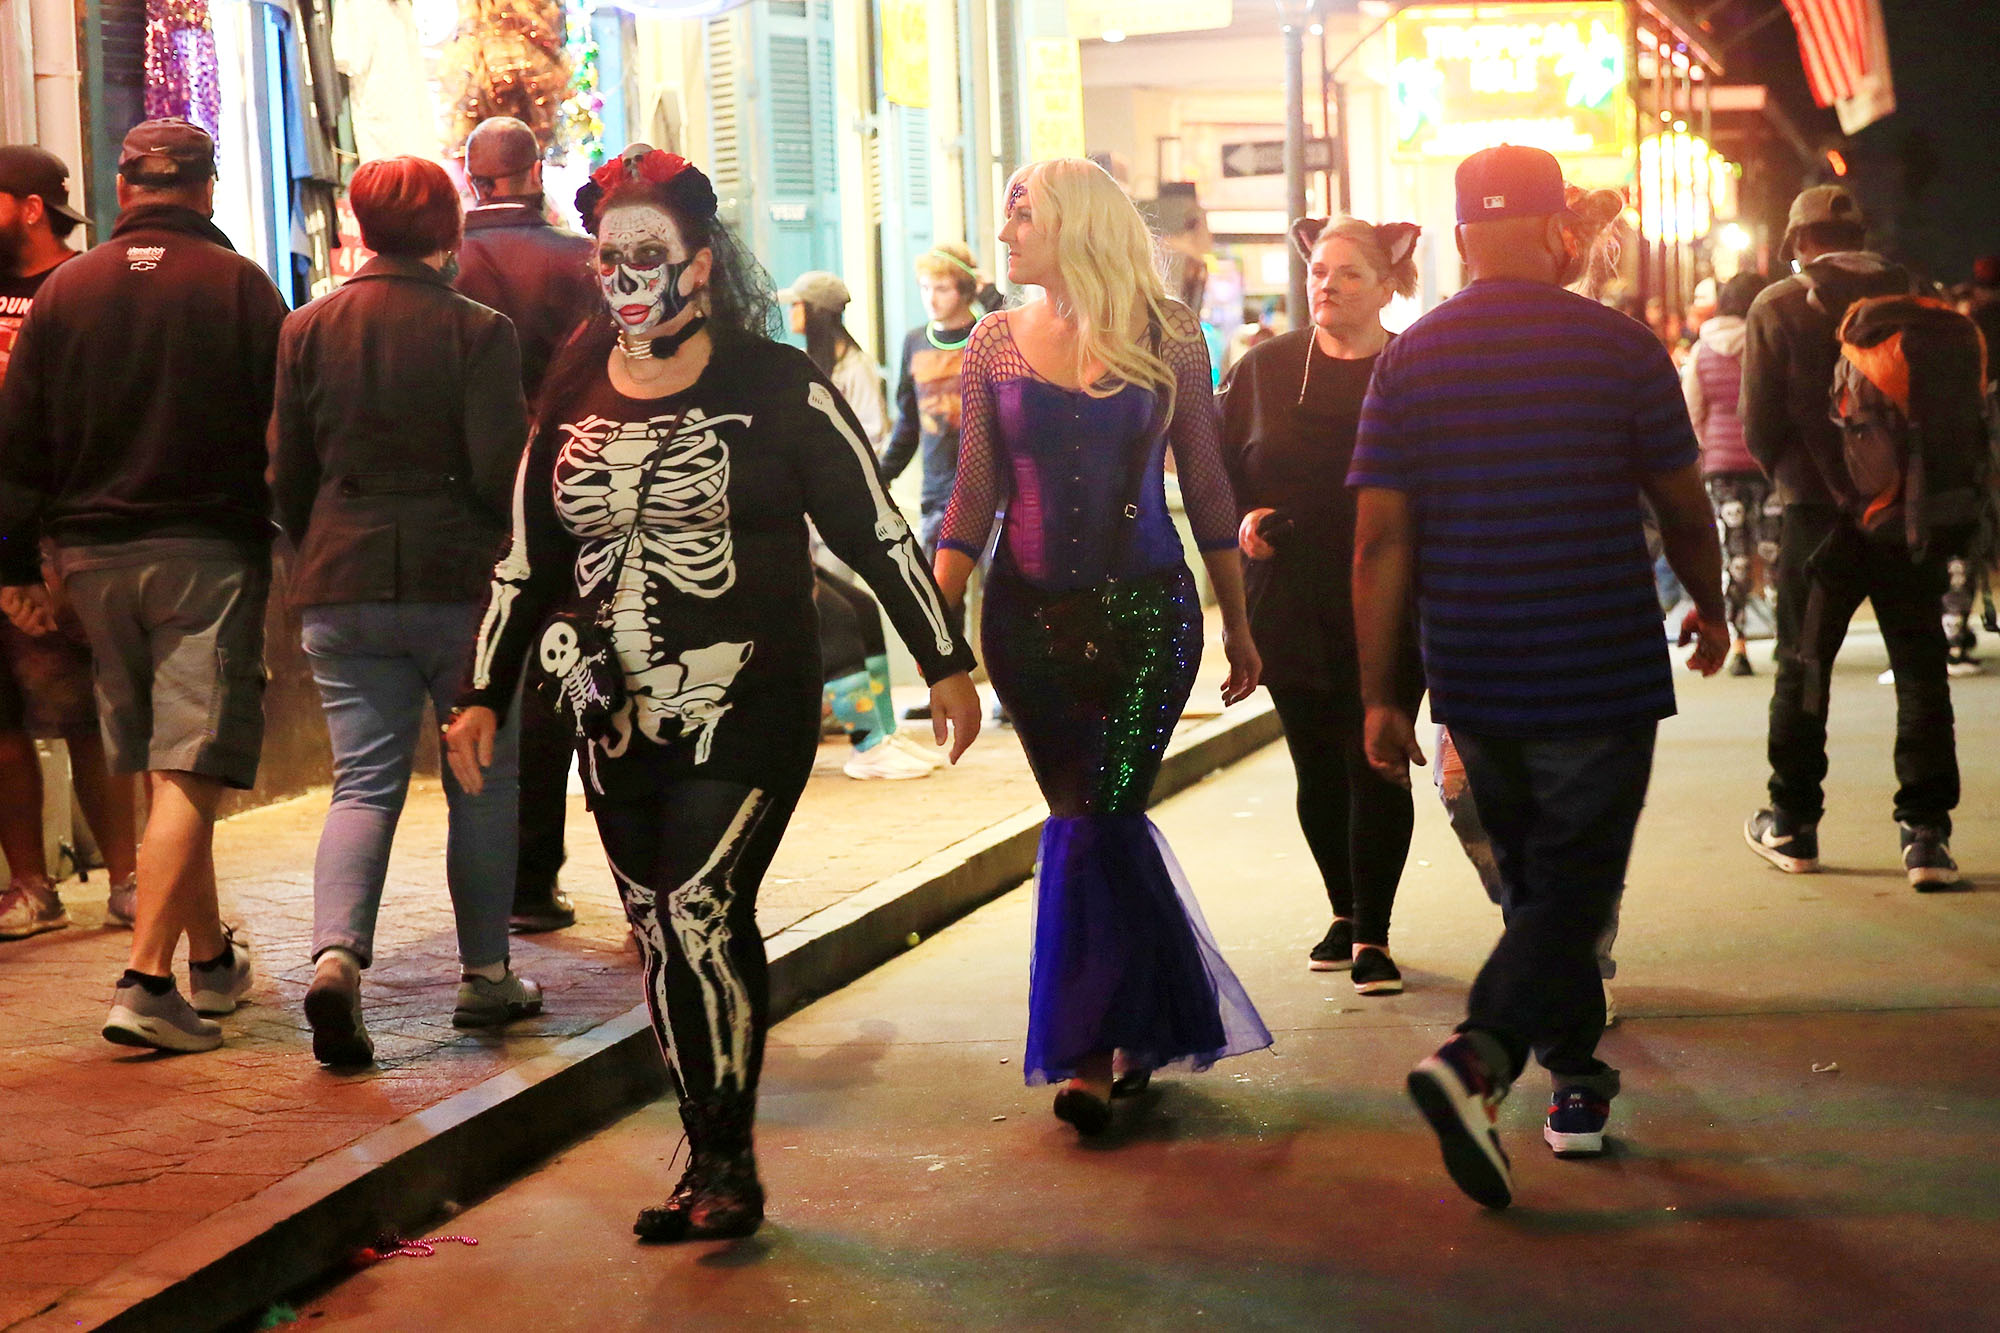 PHOTO: Bourbon Street is crowded with costumed revelers on Halloween night while public gatherings were limited and bars closed at 11pm due to COVID-19 restrictions in New Orleans, Oct. 31, 2020.